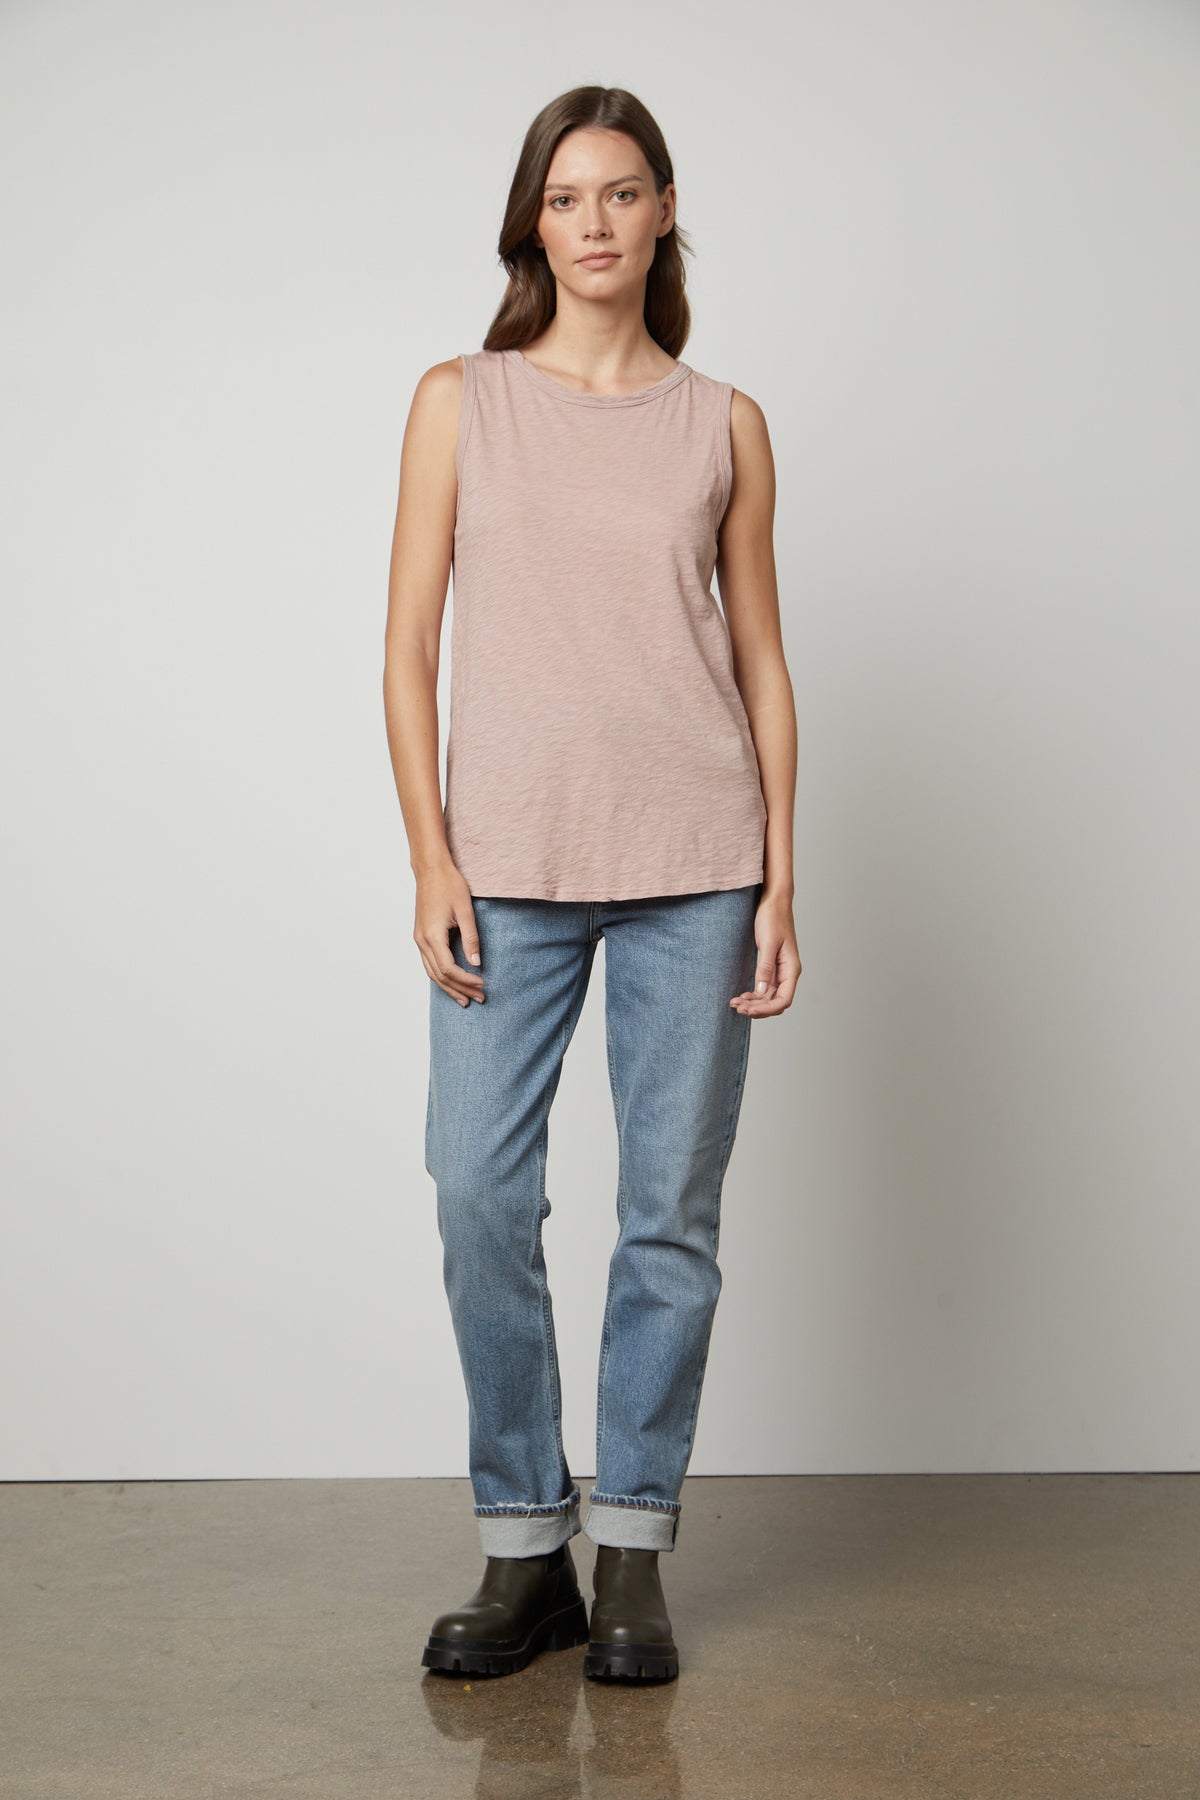 A woman wearing a Velvet by Graham & Spencer TAURUS COTTON SLUB TANK top and jeans.-35567717548225